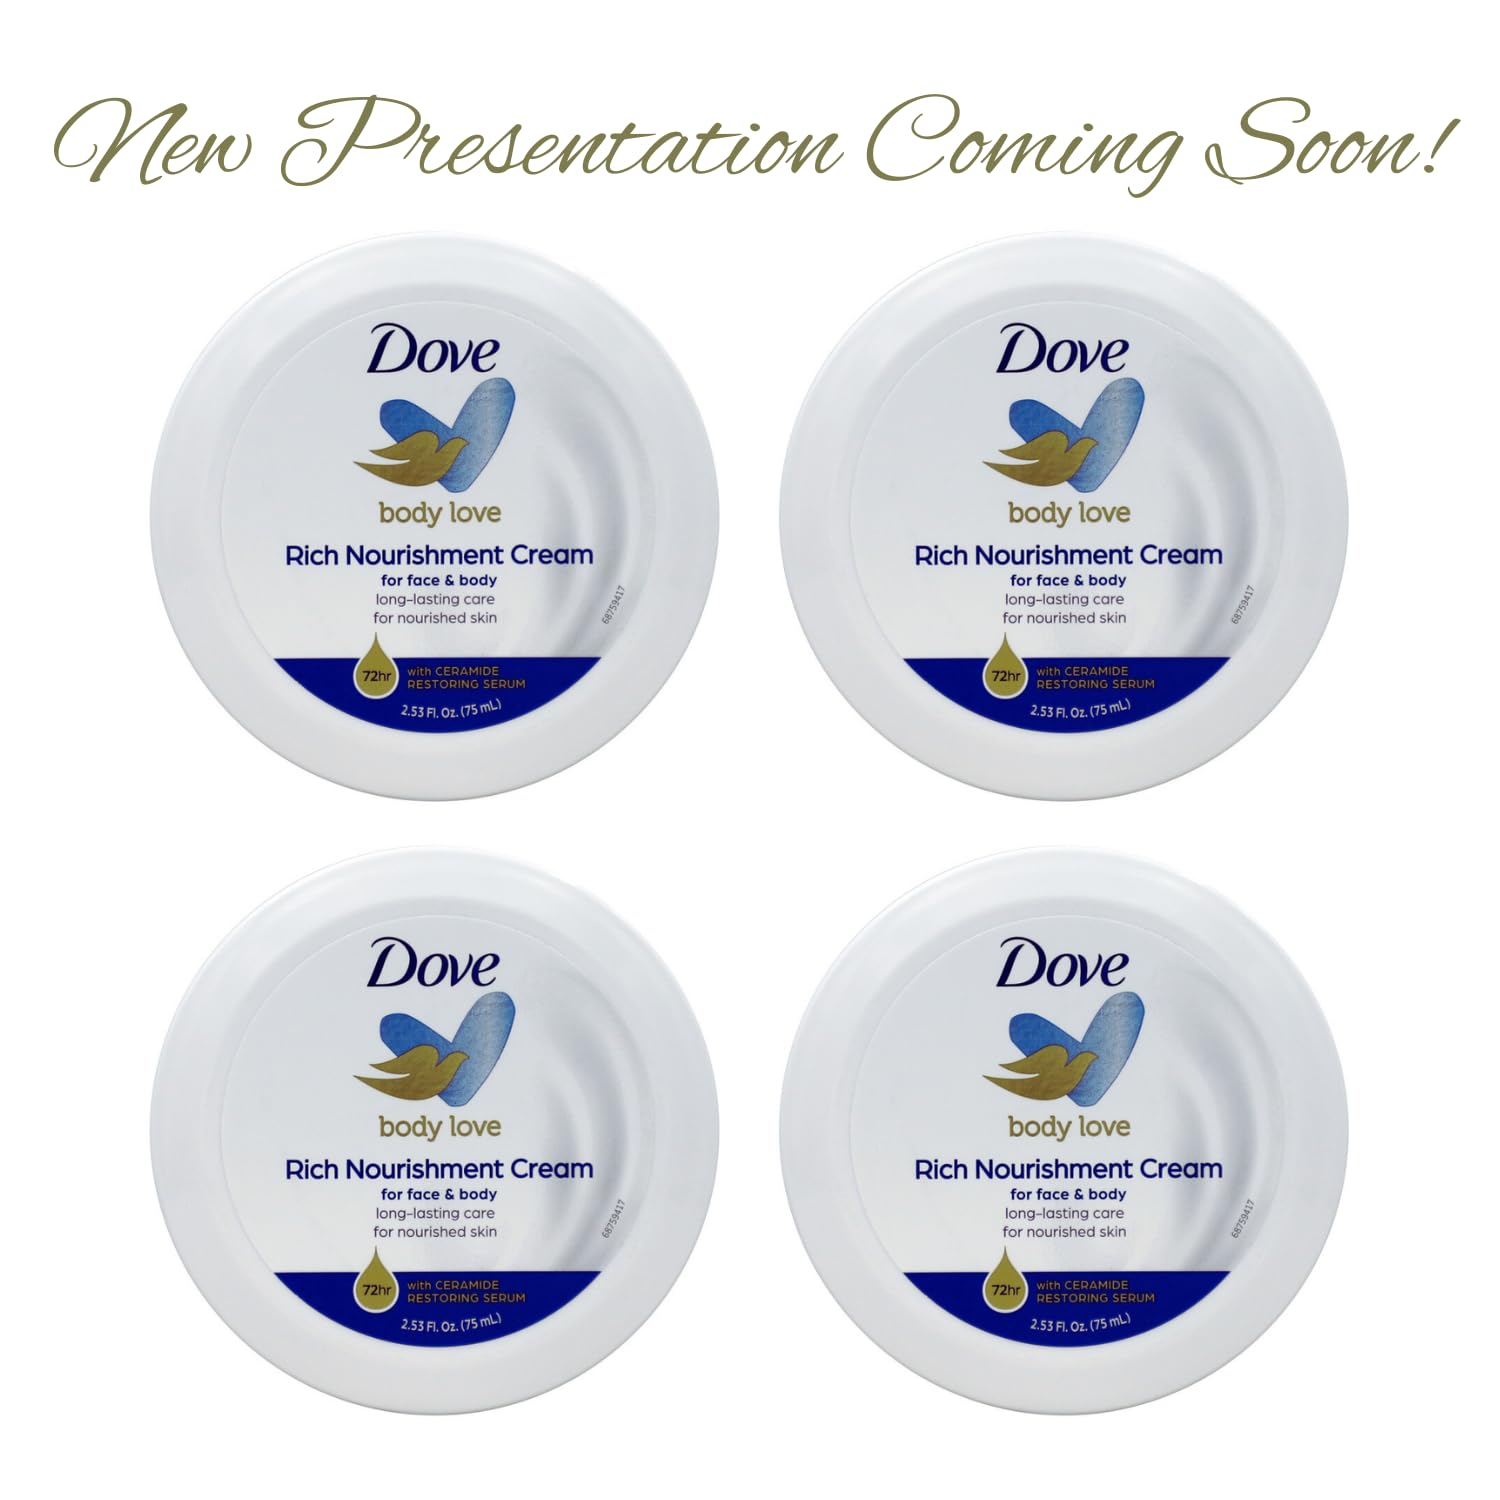 Dove Nourishing Body Care, Face, Hand, and Body Rich Nourishment Cream for Extra Dry Skin with 48-Hour Moisturization, 4-Pack, 2.53 Oz Each Jar